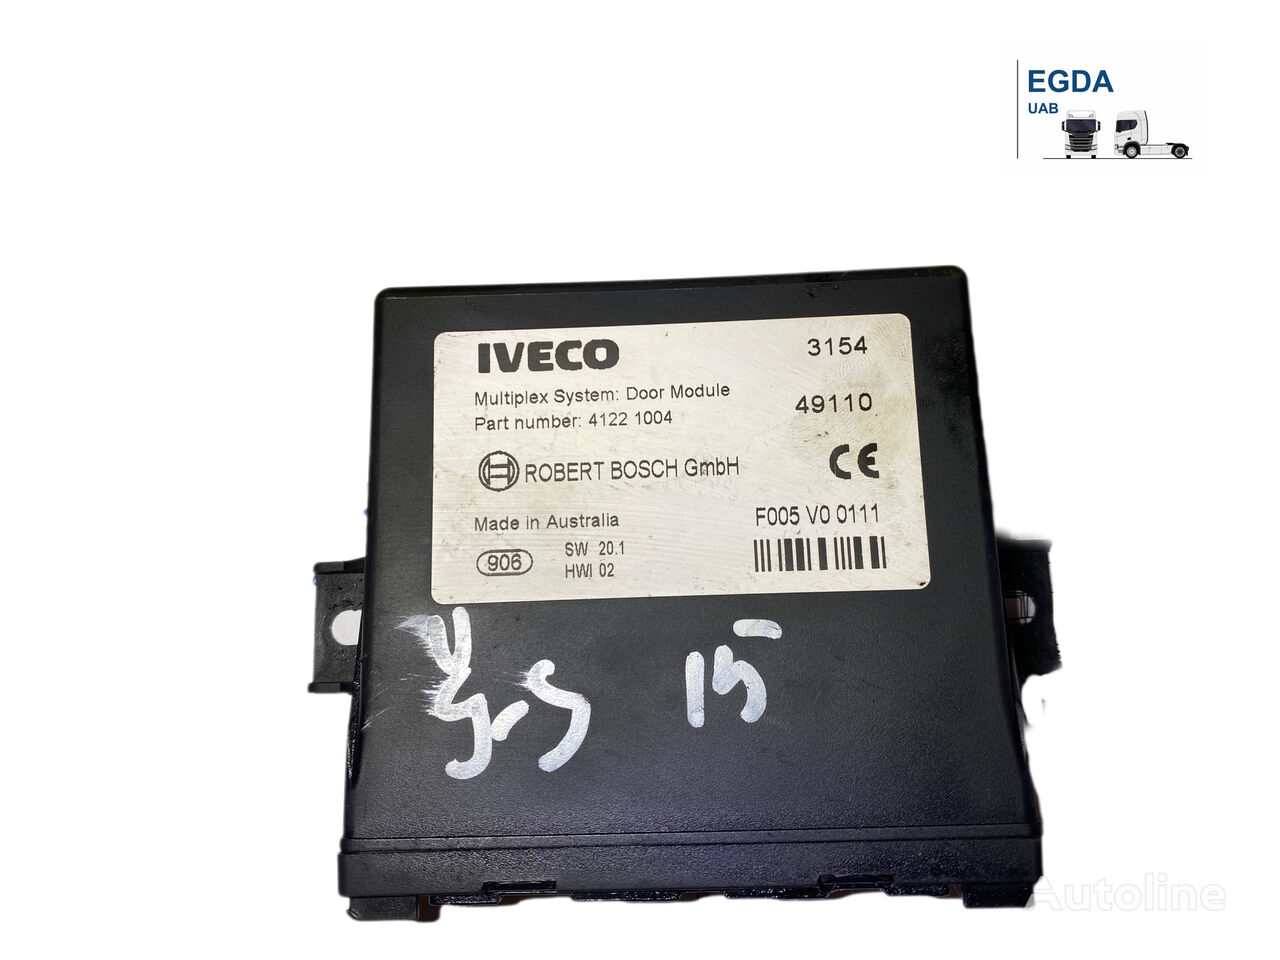 IVECO 41221004, 88816 control unit for IVECO STRALIS truck tractor